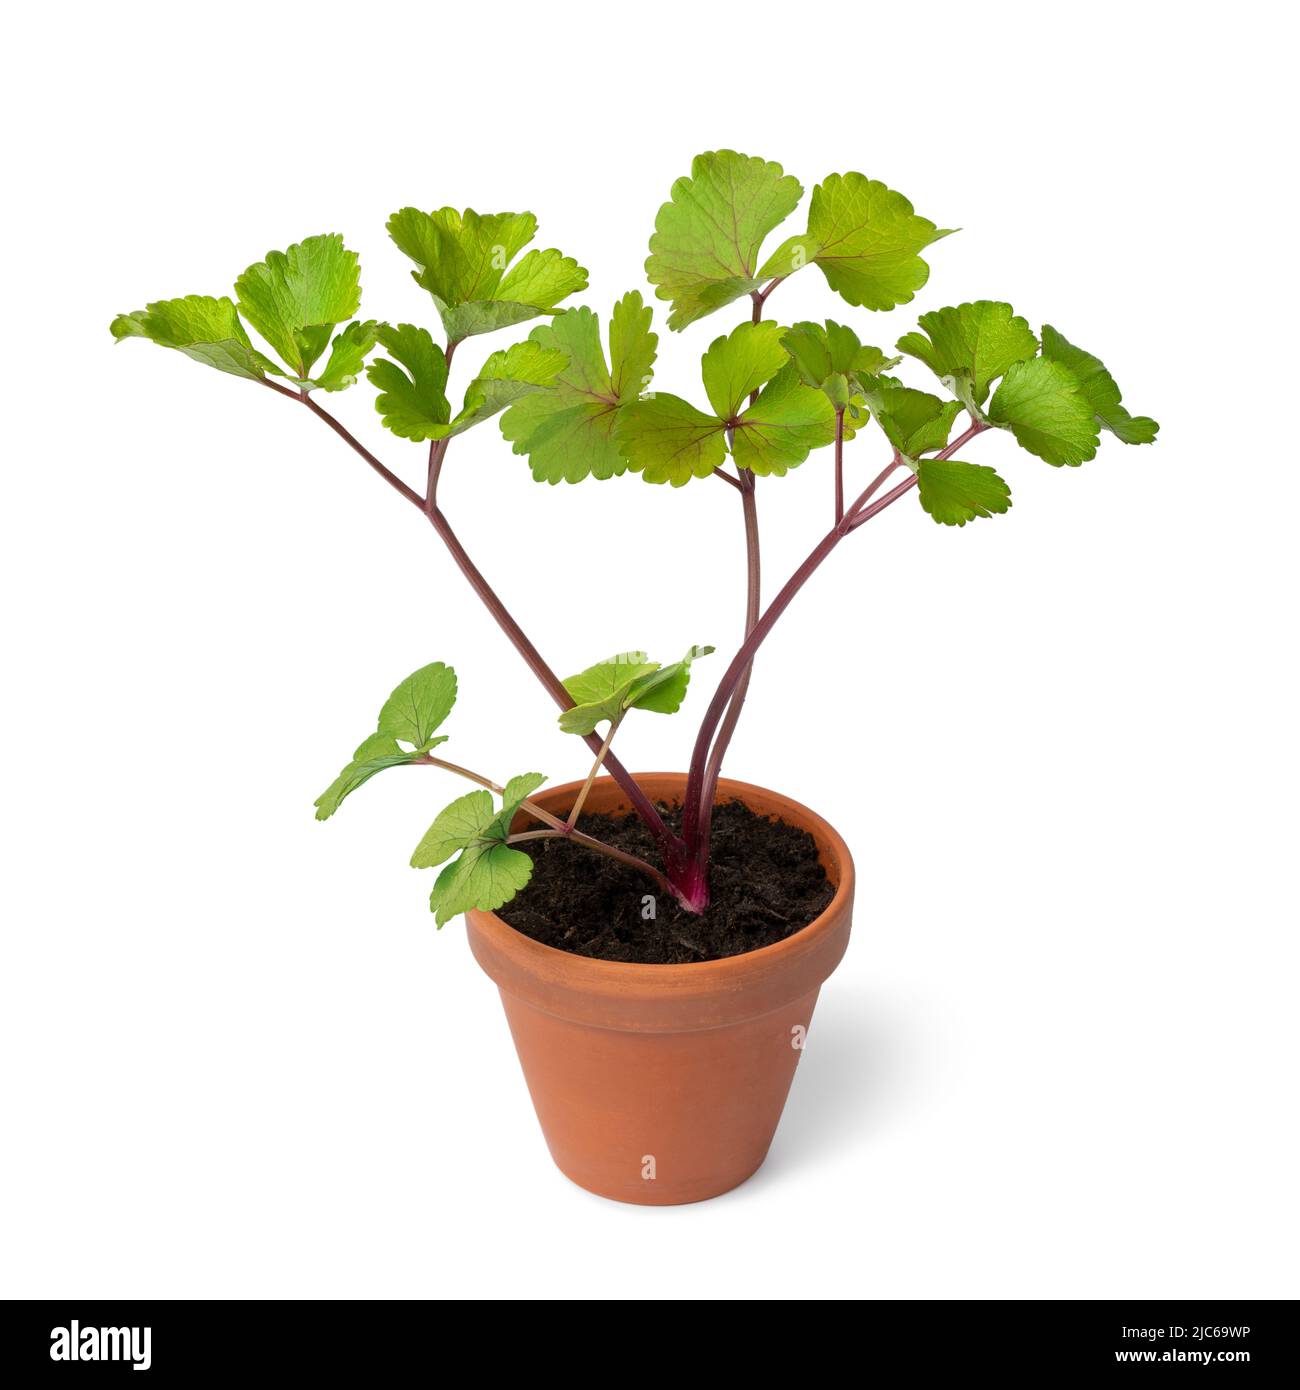 Scots Lovage plant in a pot isolated on white background Stock Photo